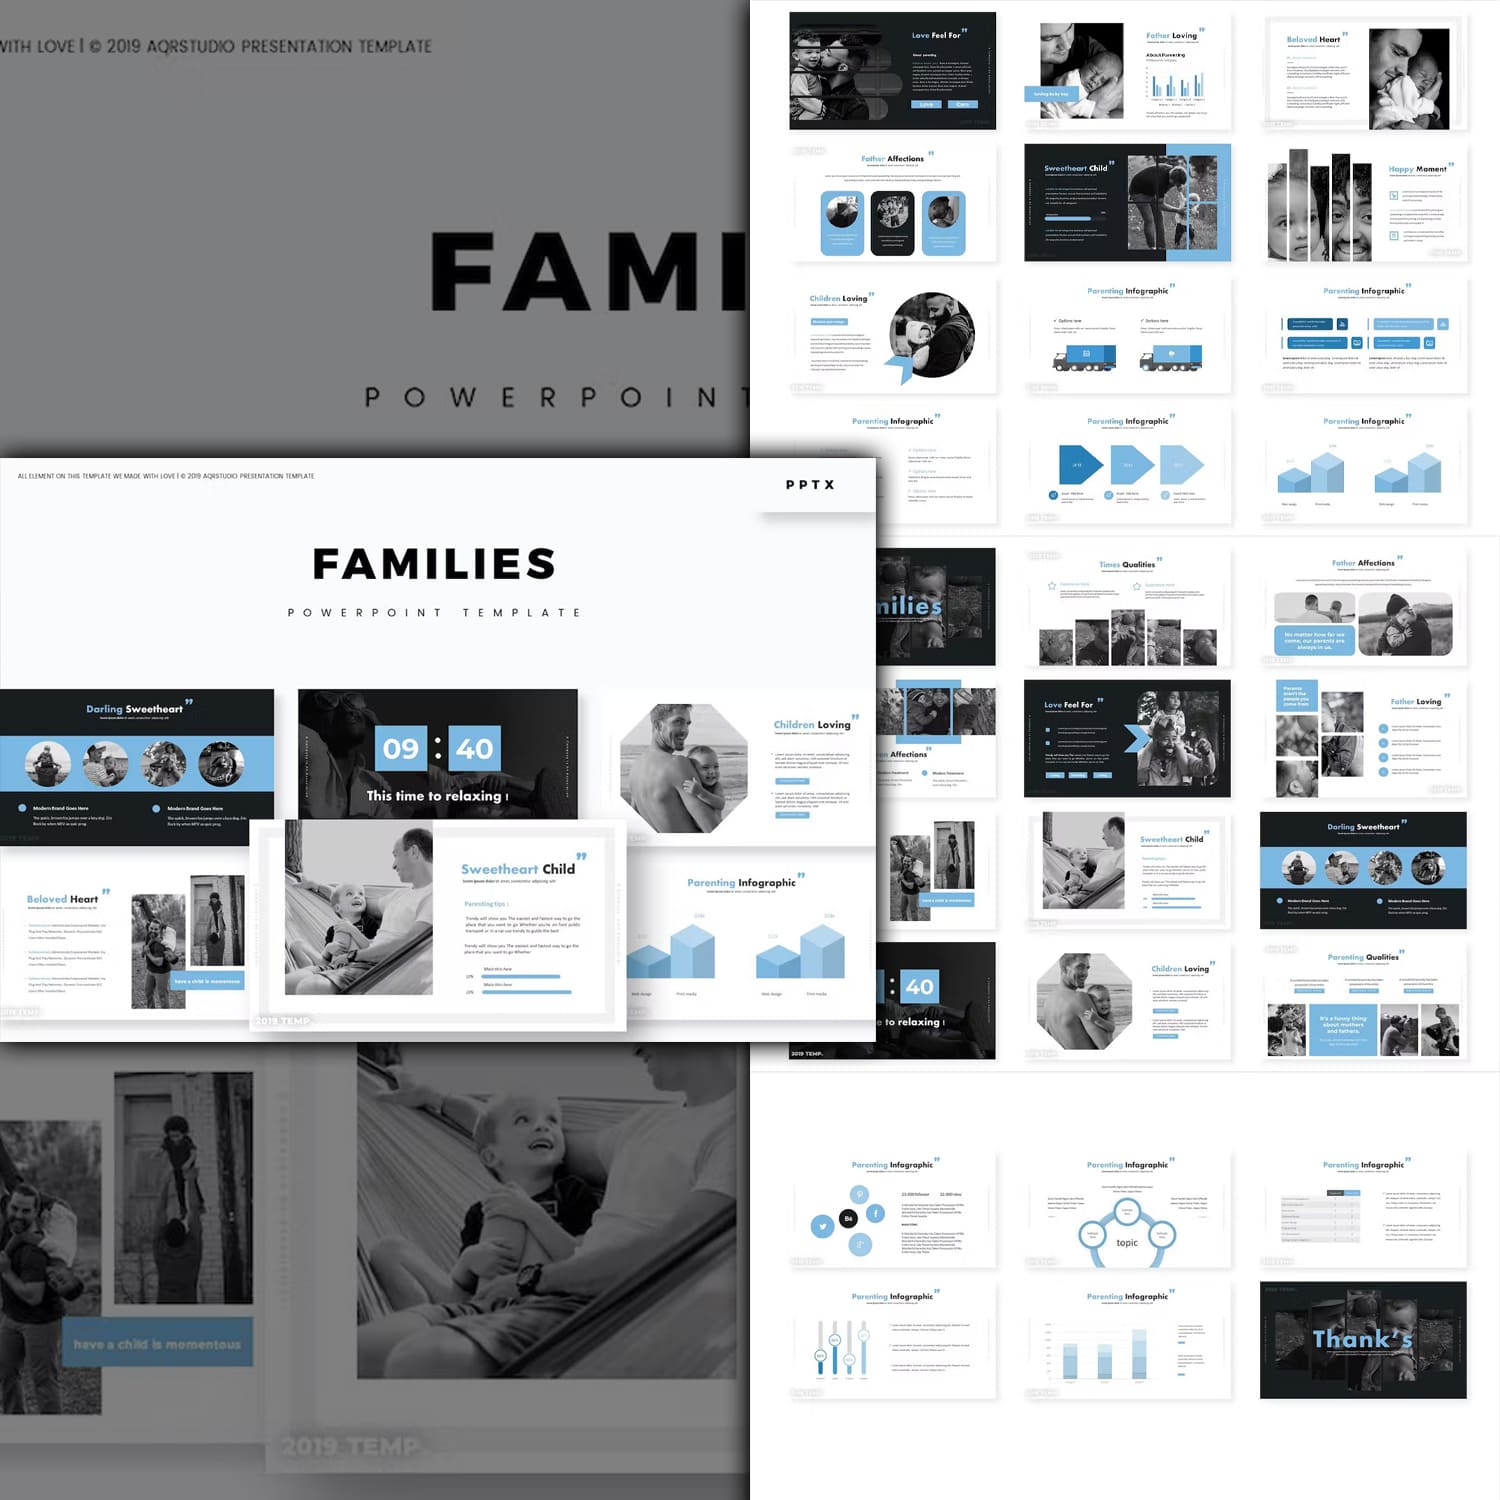 Families powerpoint template from aqrstudio.